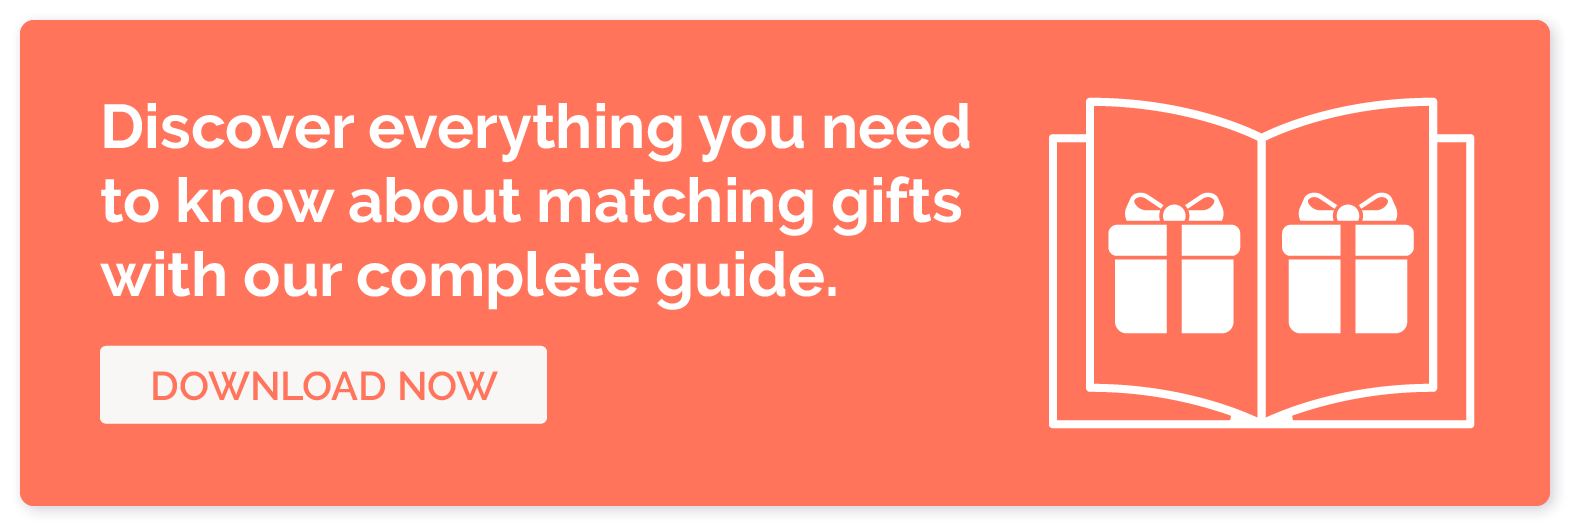 Discover everything you need to know about matching gifts with our complete guide. Download now.